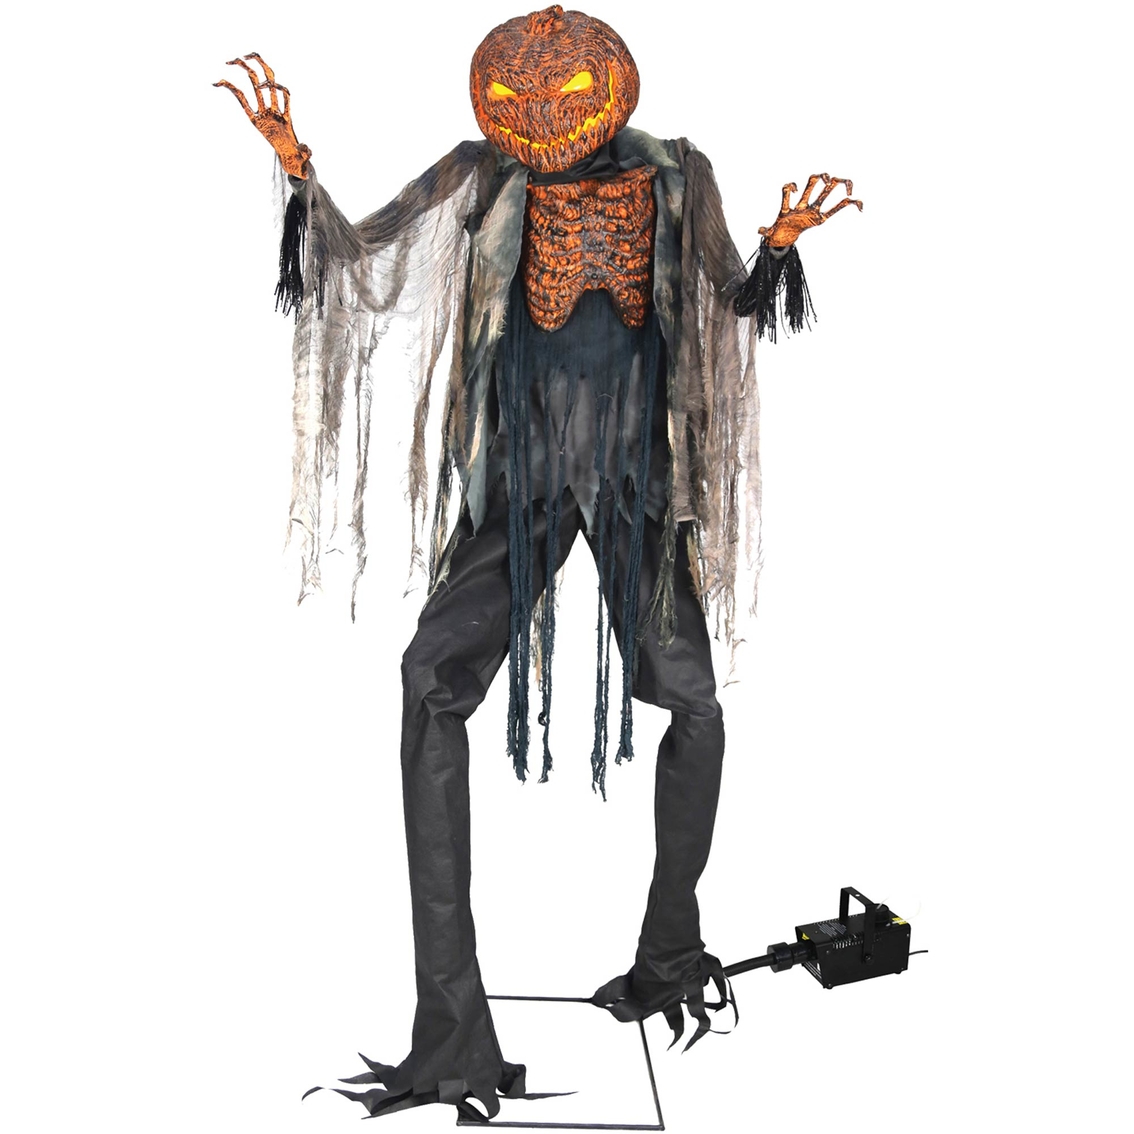 Morris Costumes Scorched Scarecrow Prop with Fog